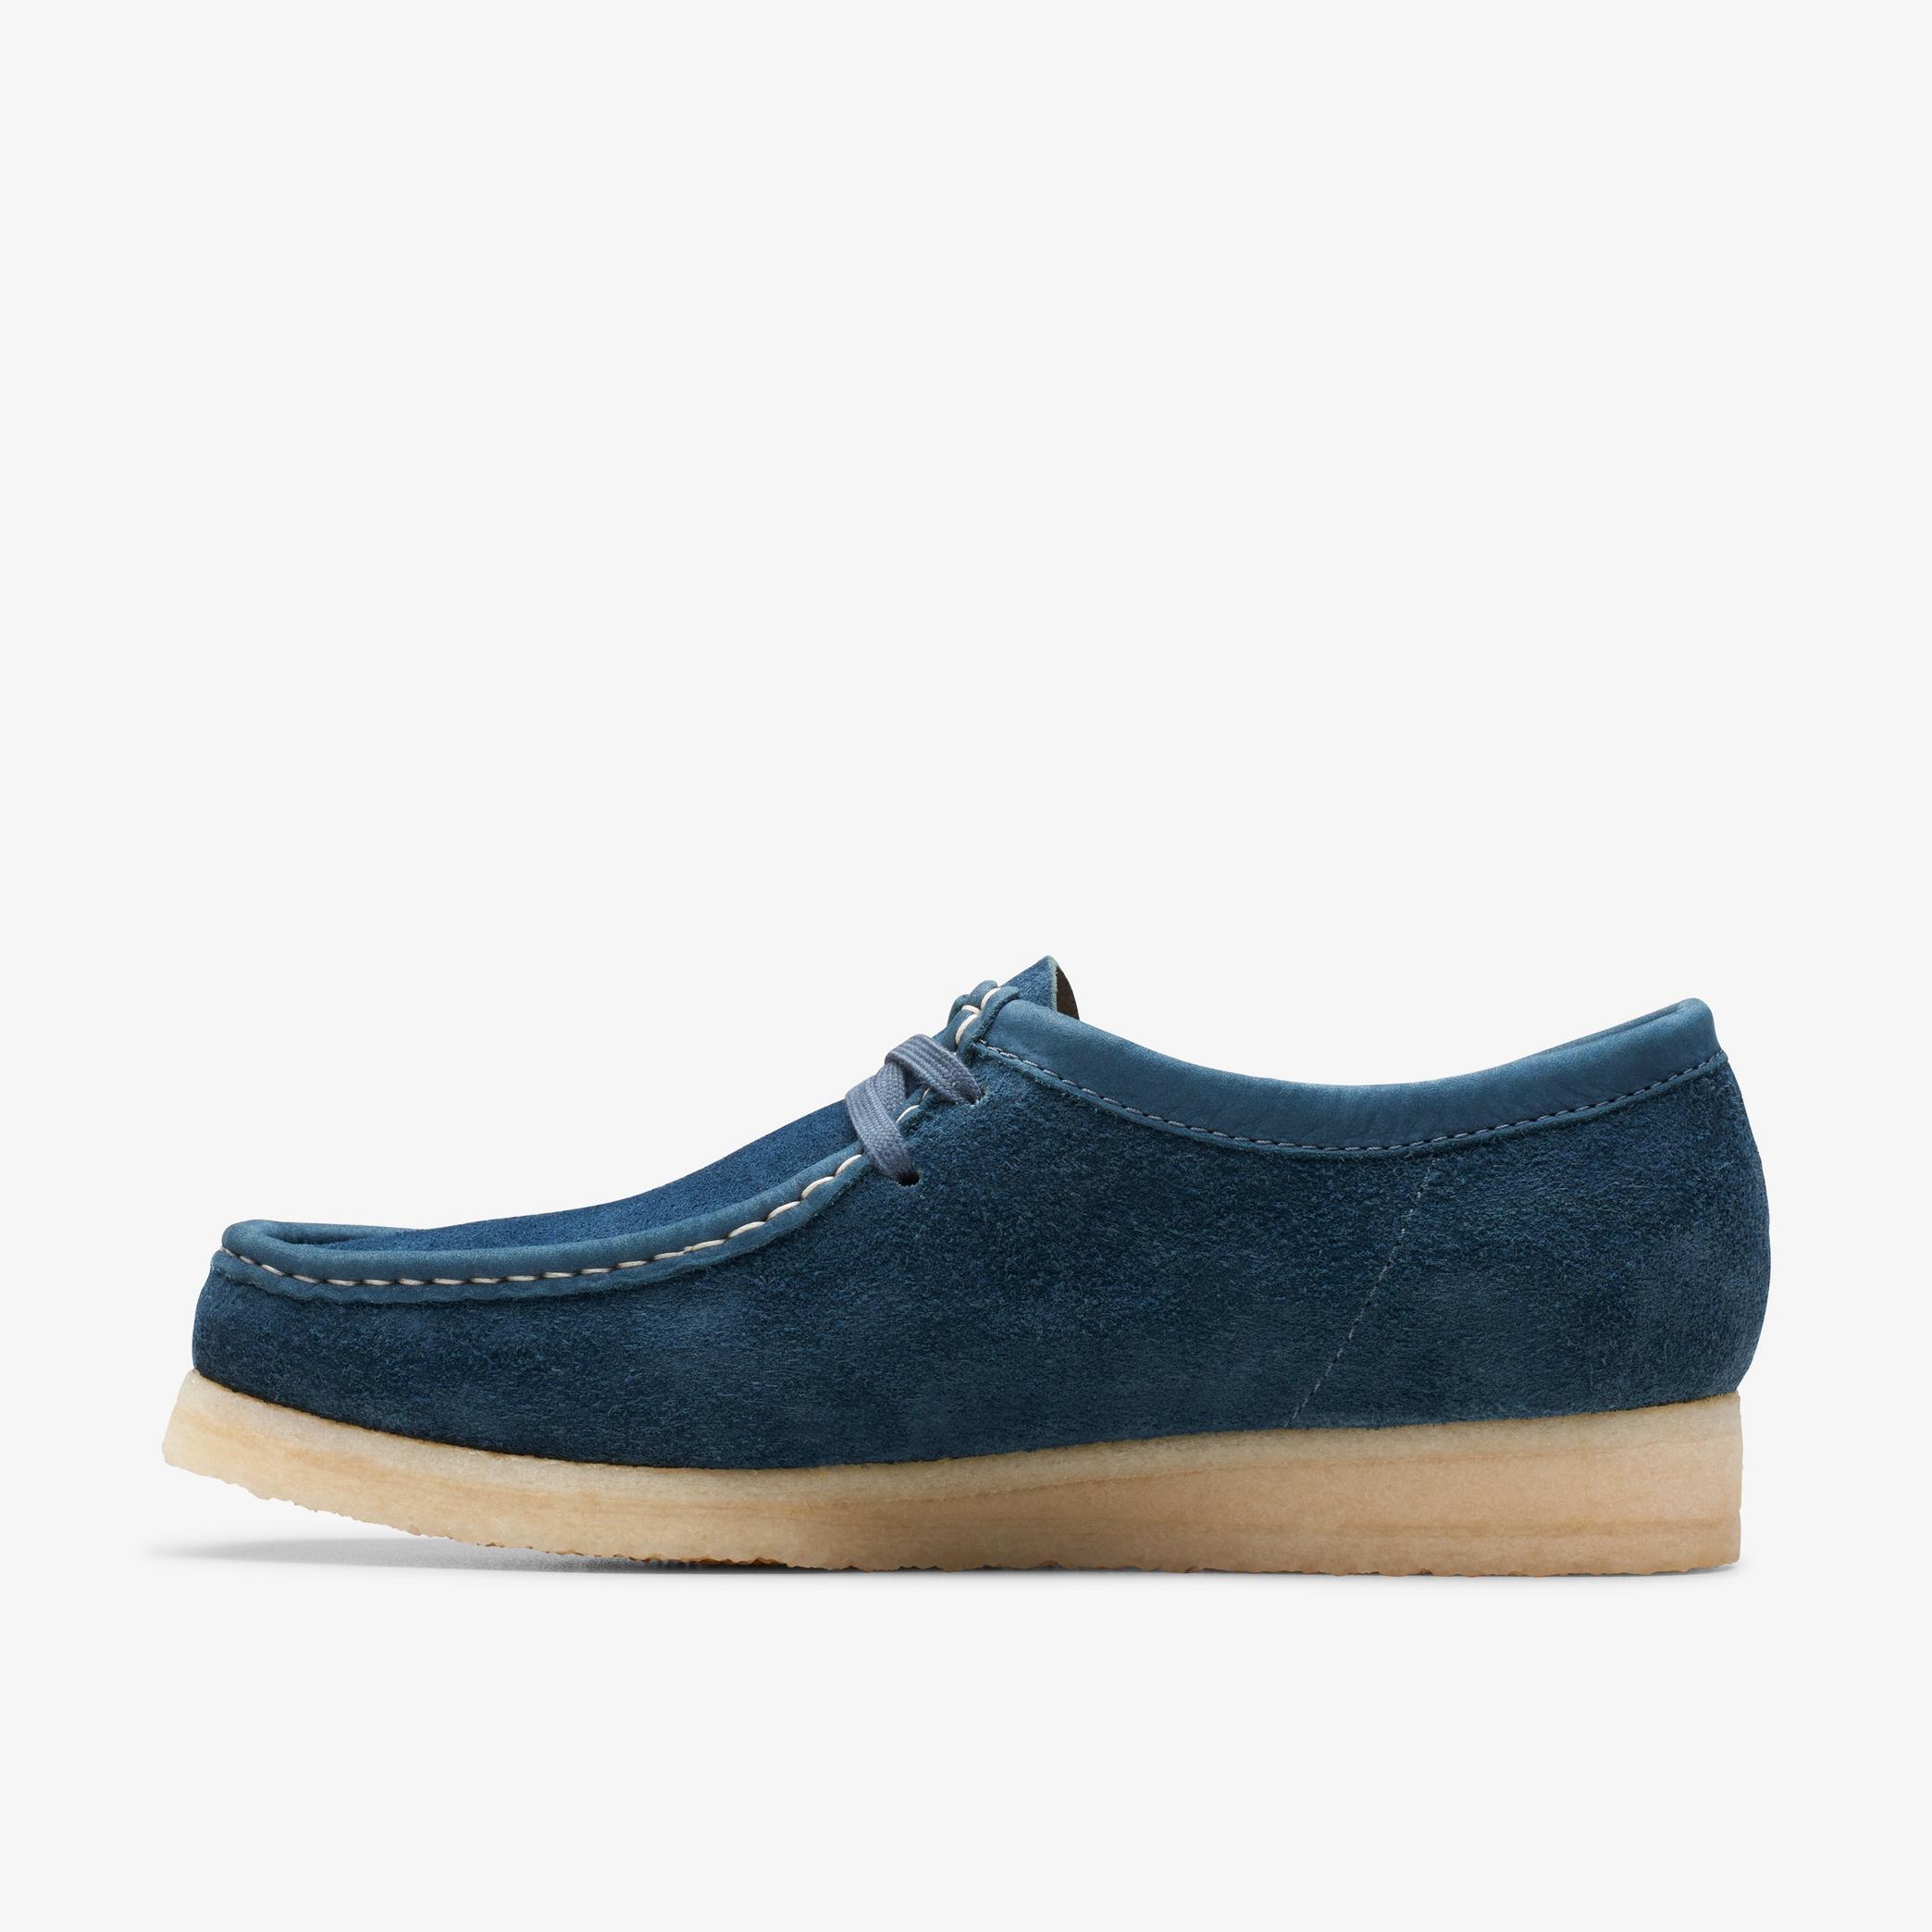 Mens Wallabee Navy/Teal Suede Shoes | Clarks UK